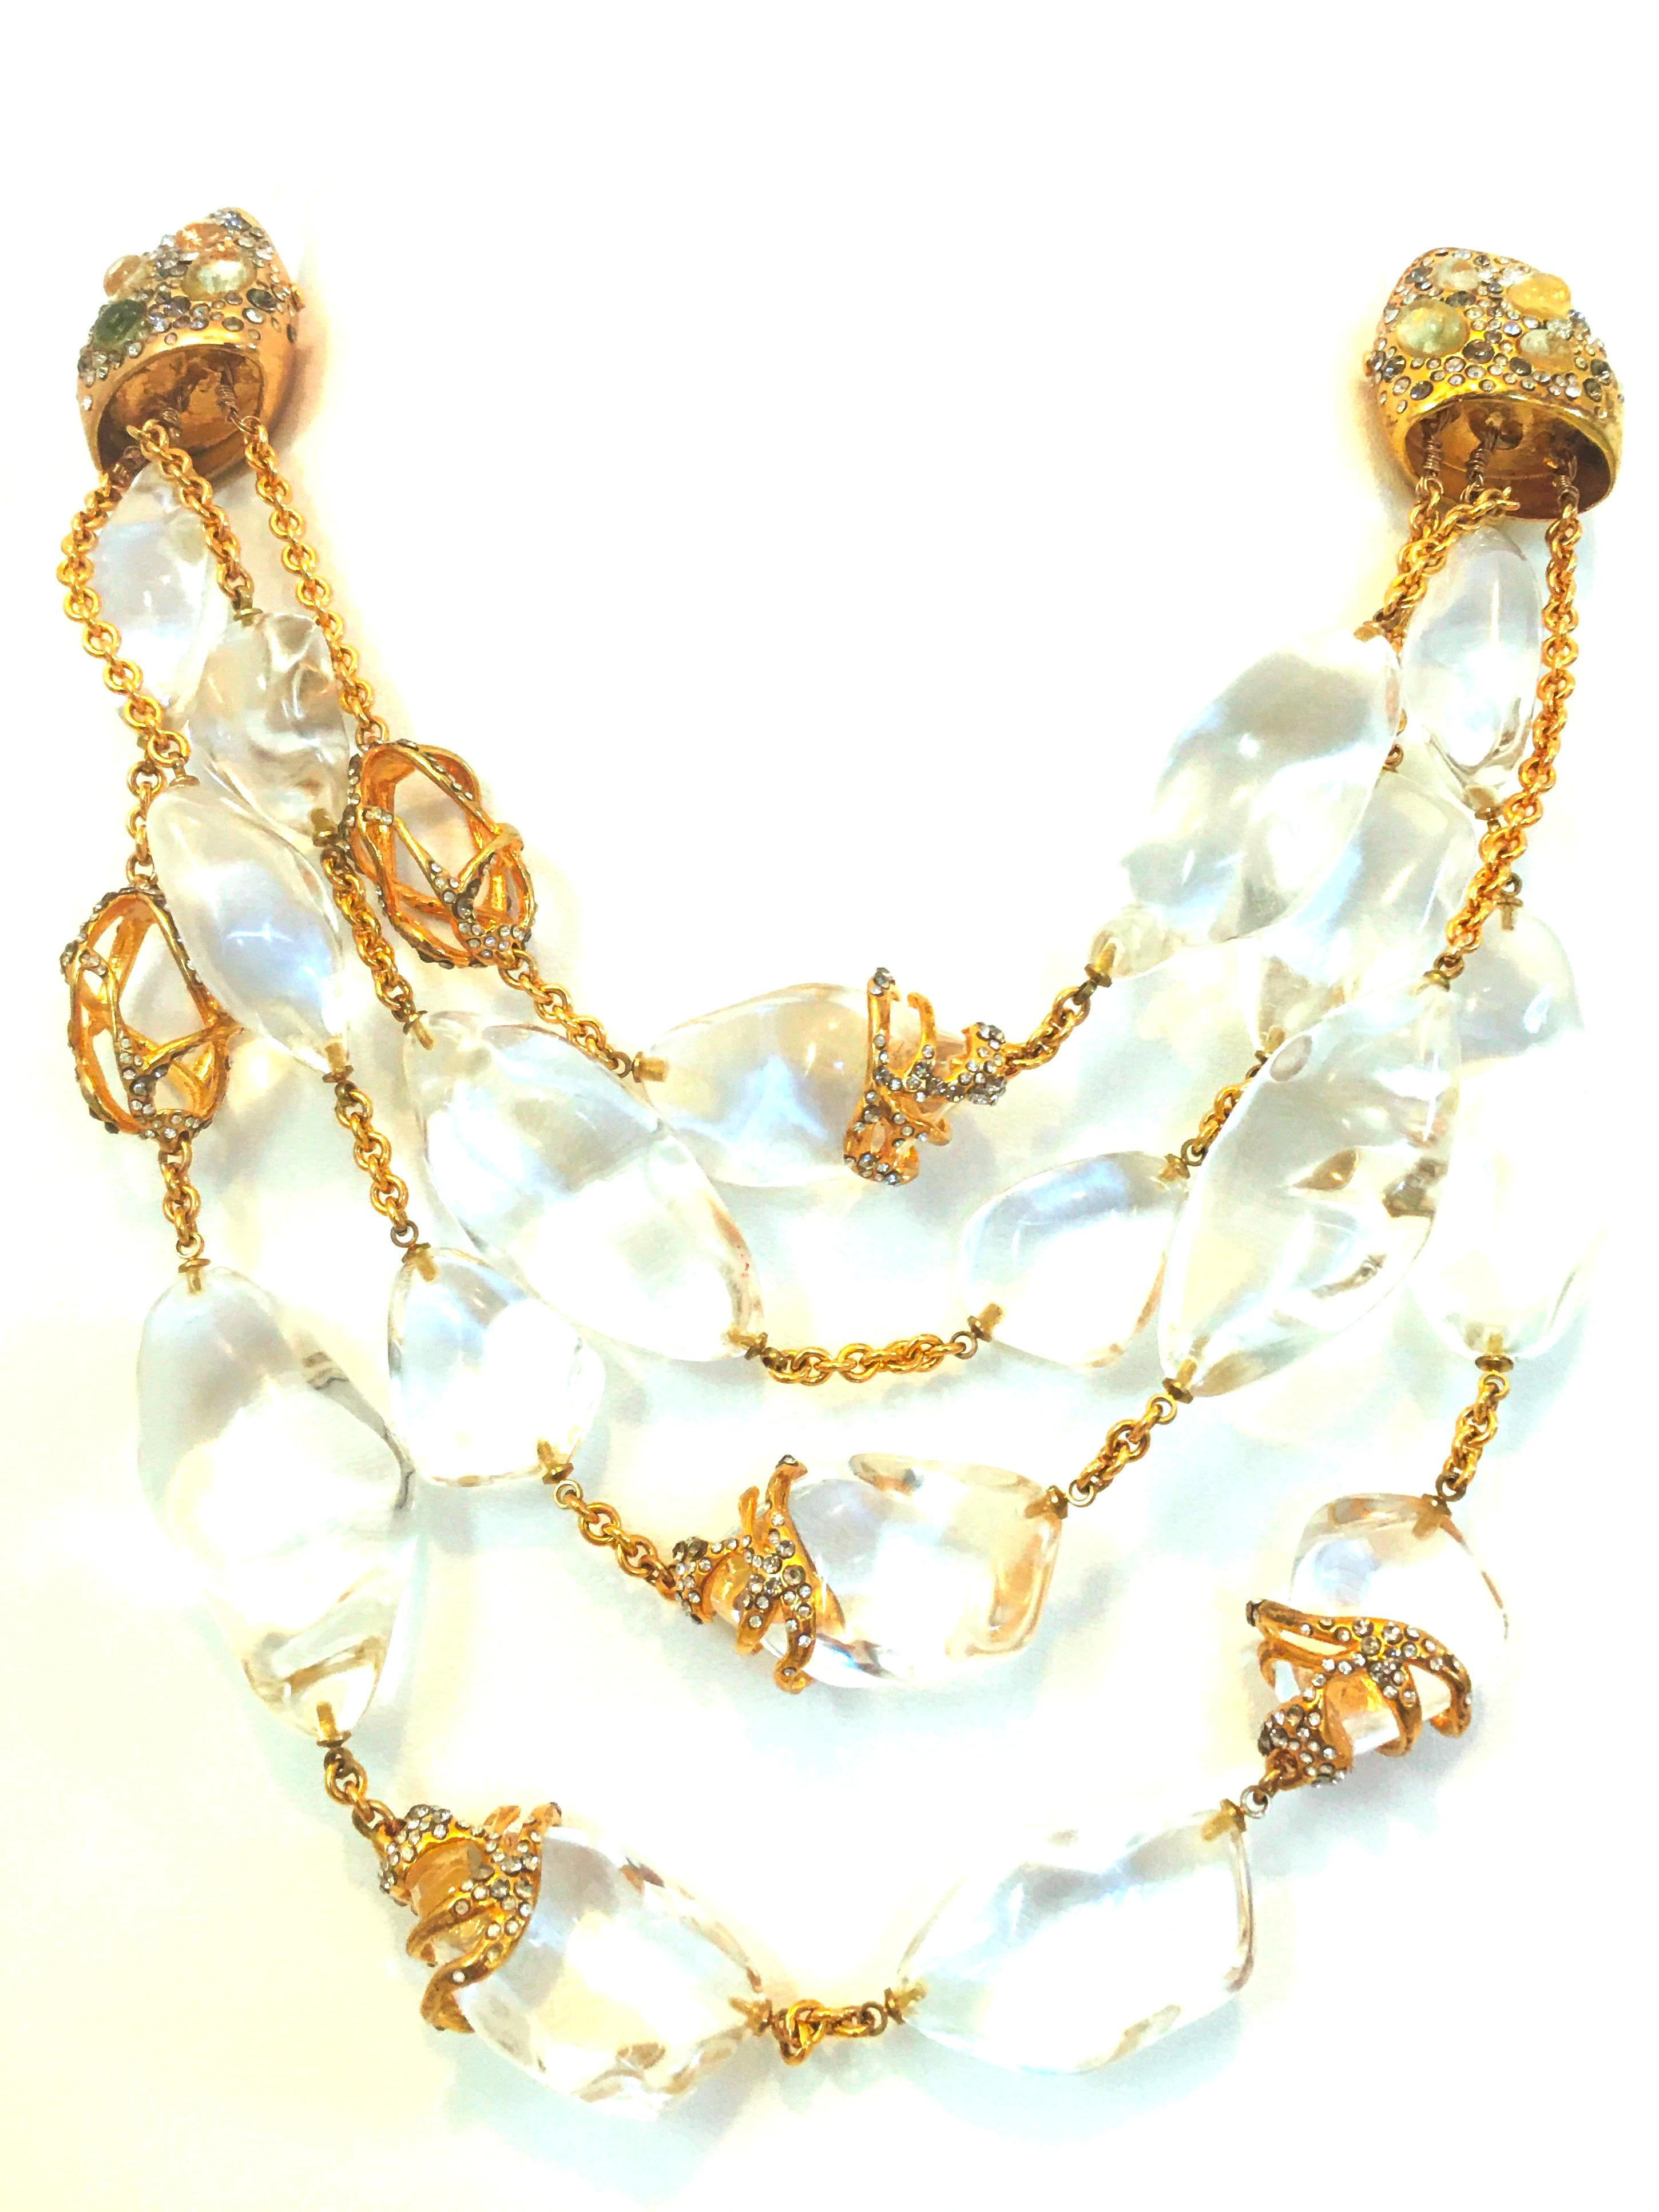 Modernist 21st Century Alexis Bittar Lucite Jeweled Gold Plate Multi Strand Necklace